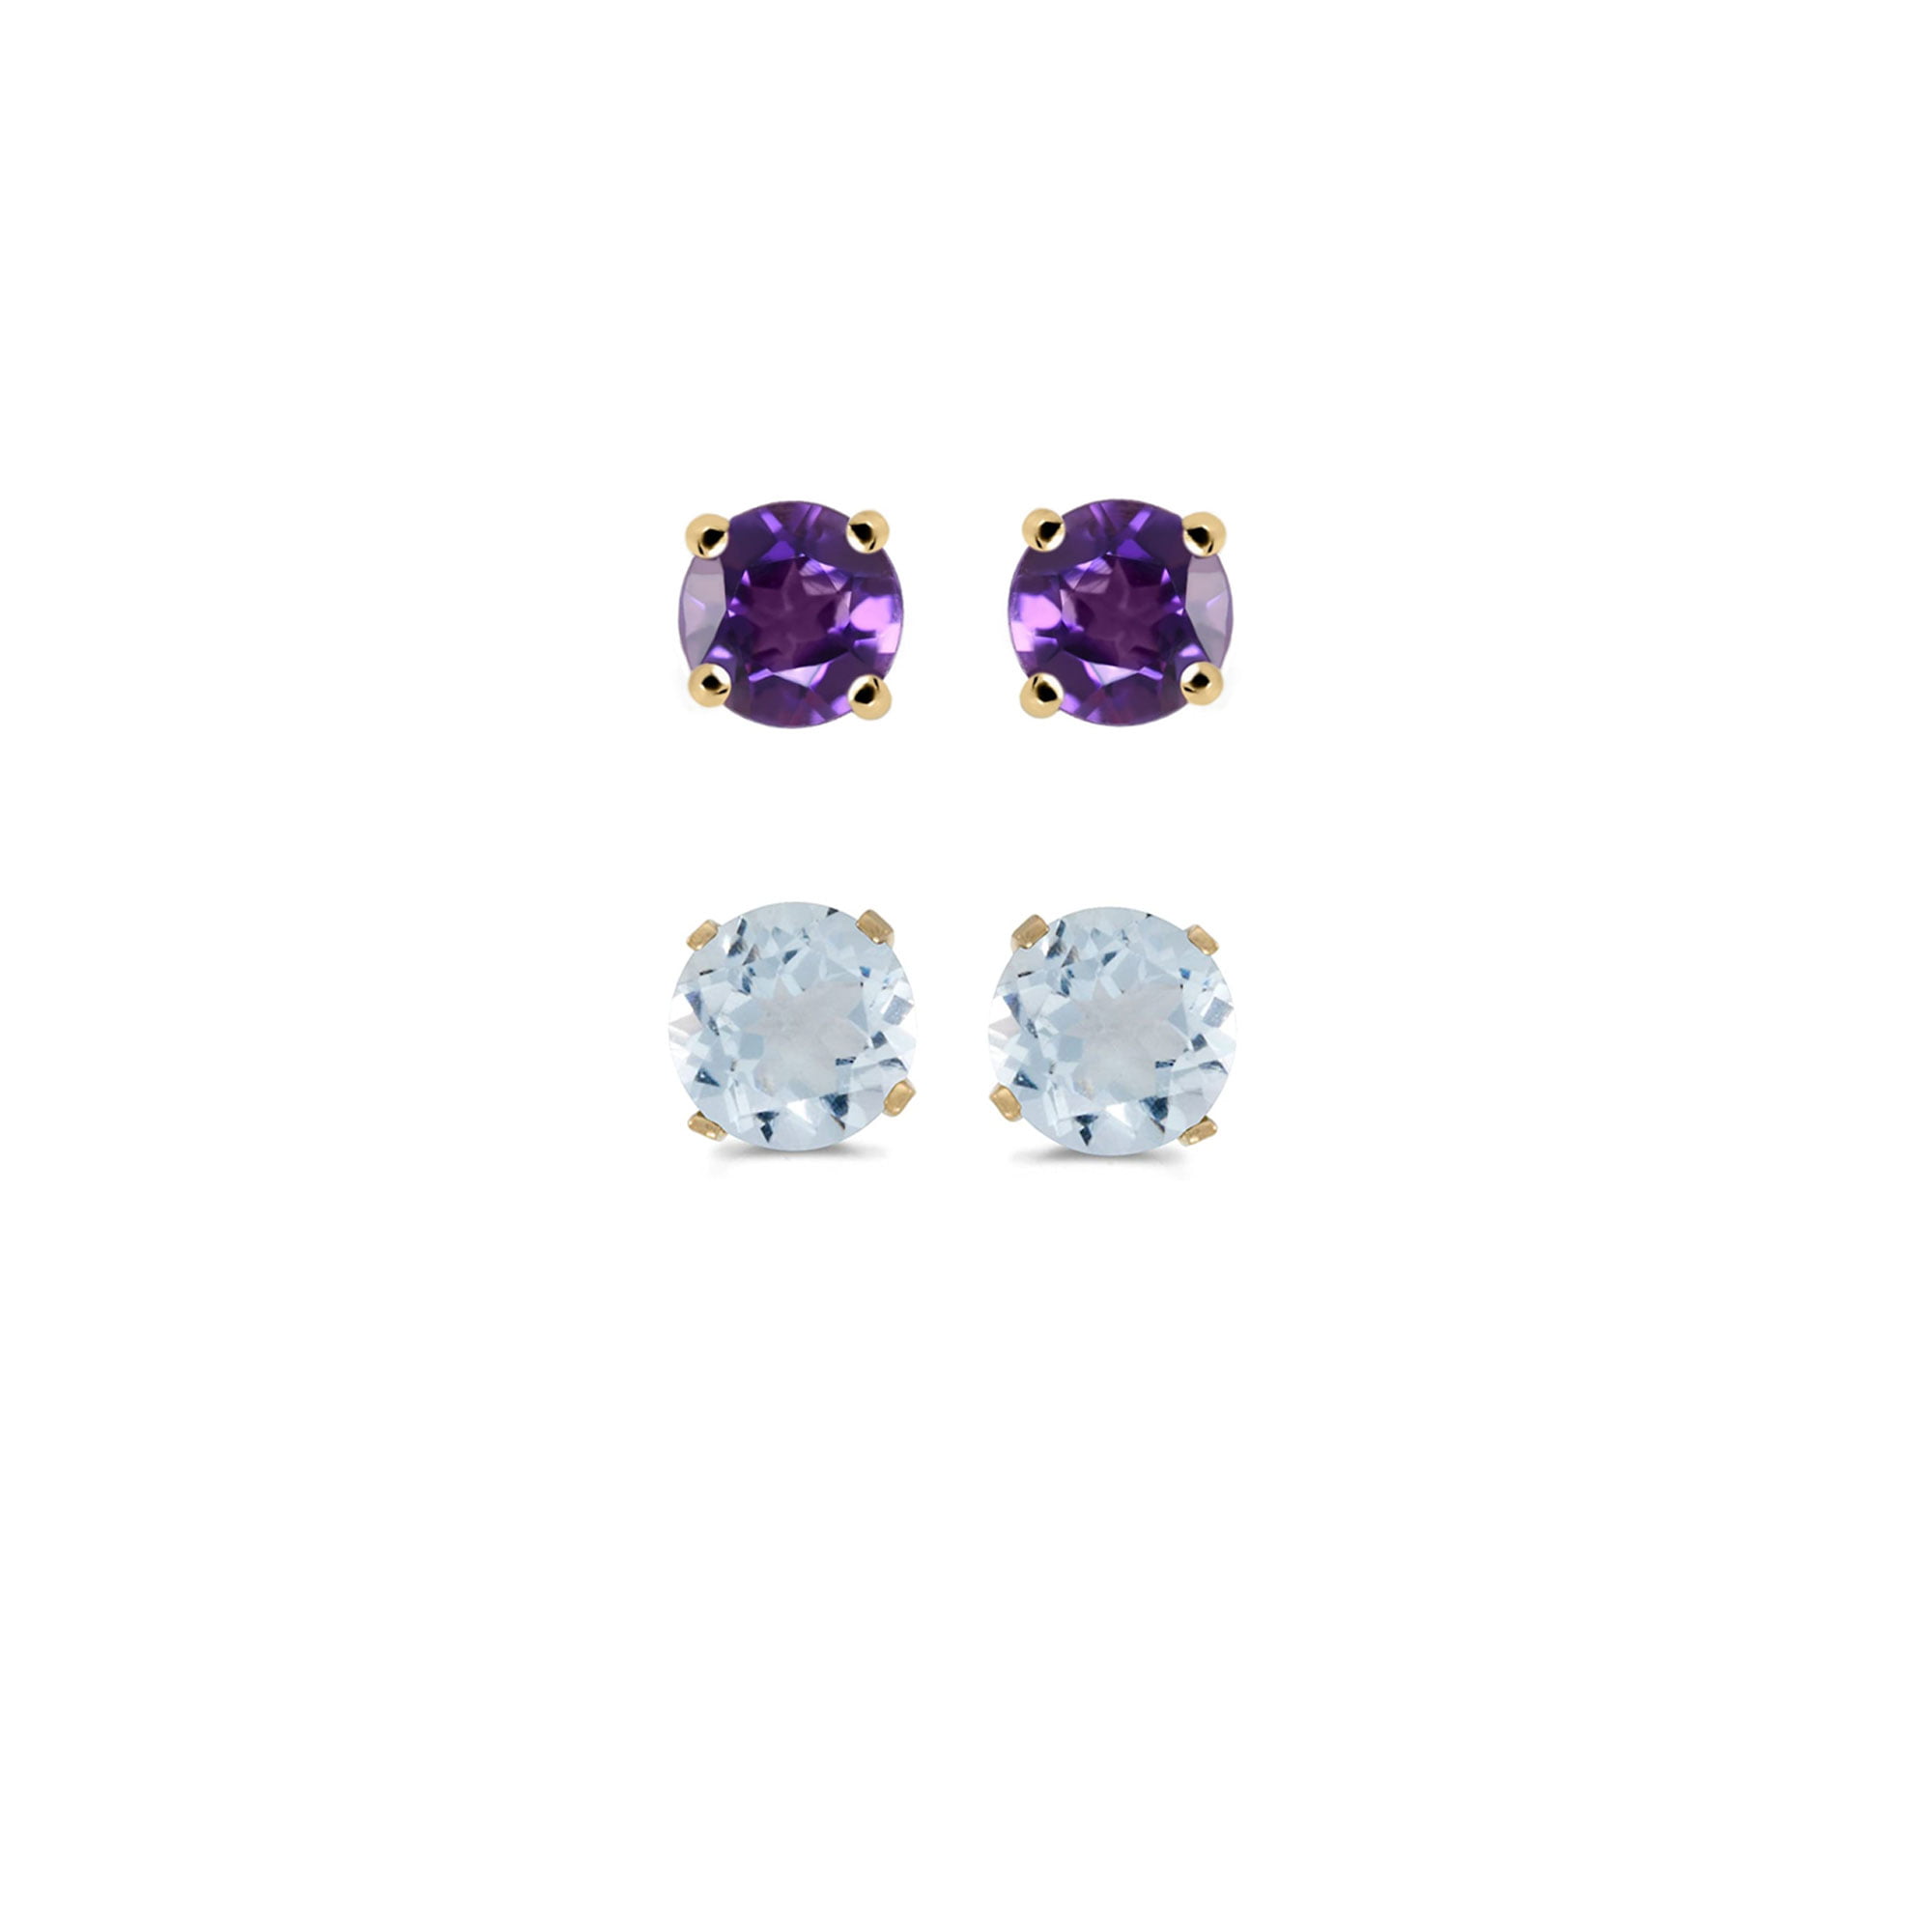 2Ct Round Cut Amethyst Flower Style Push Back Stud Earrings 14K Yellow Gold Over